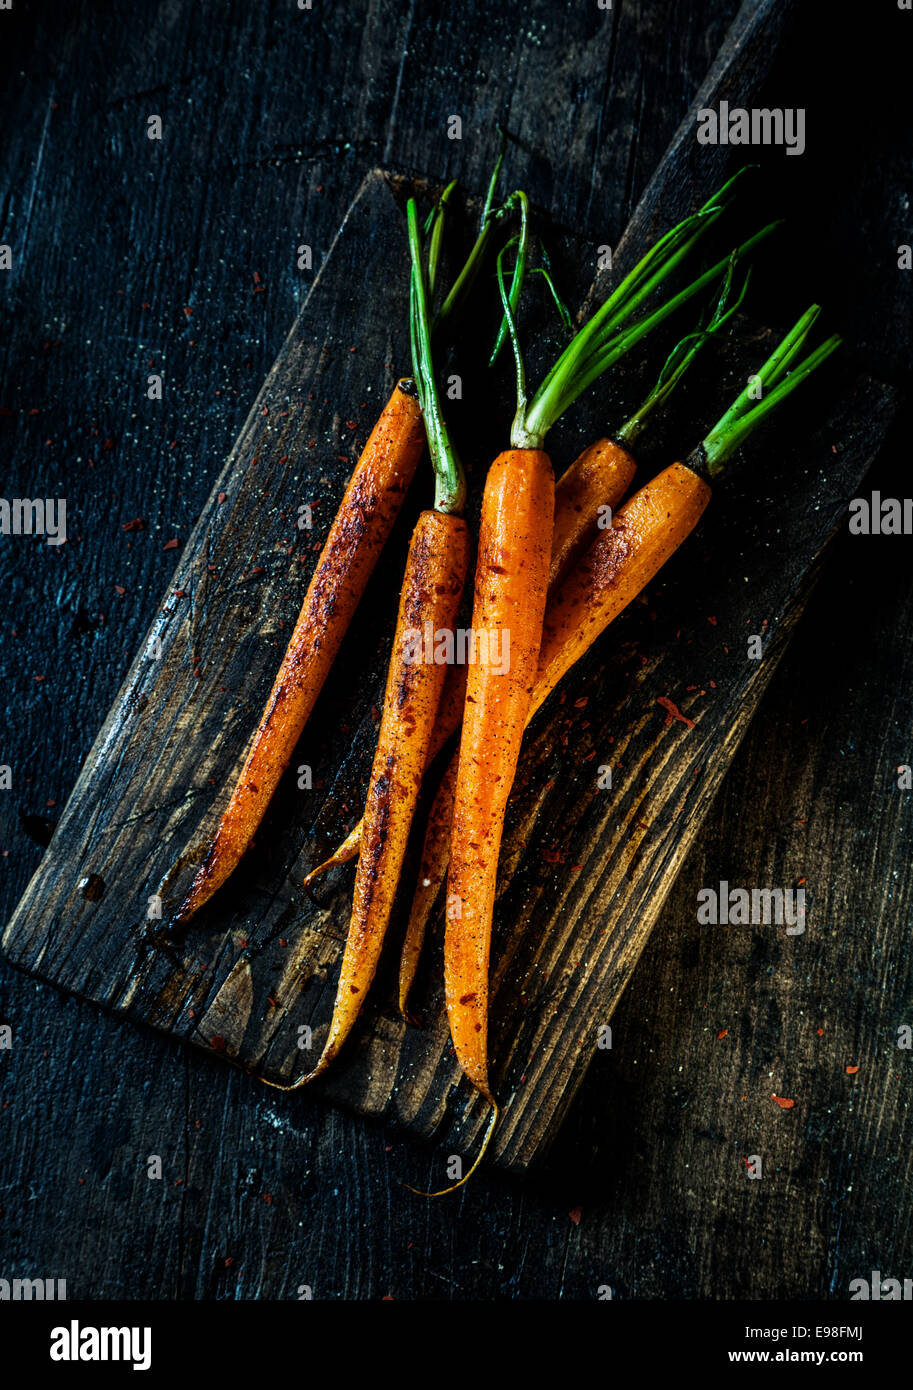 Pile of fried fresh young whole carrots ready to be eaten served on an old grungy rustic wooden board, overhead view Stock Photo